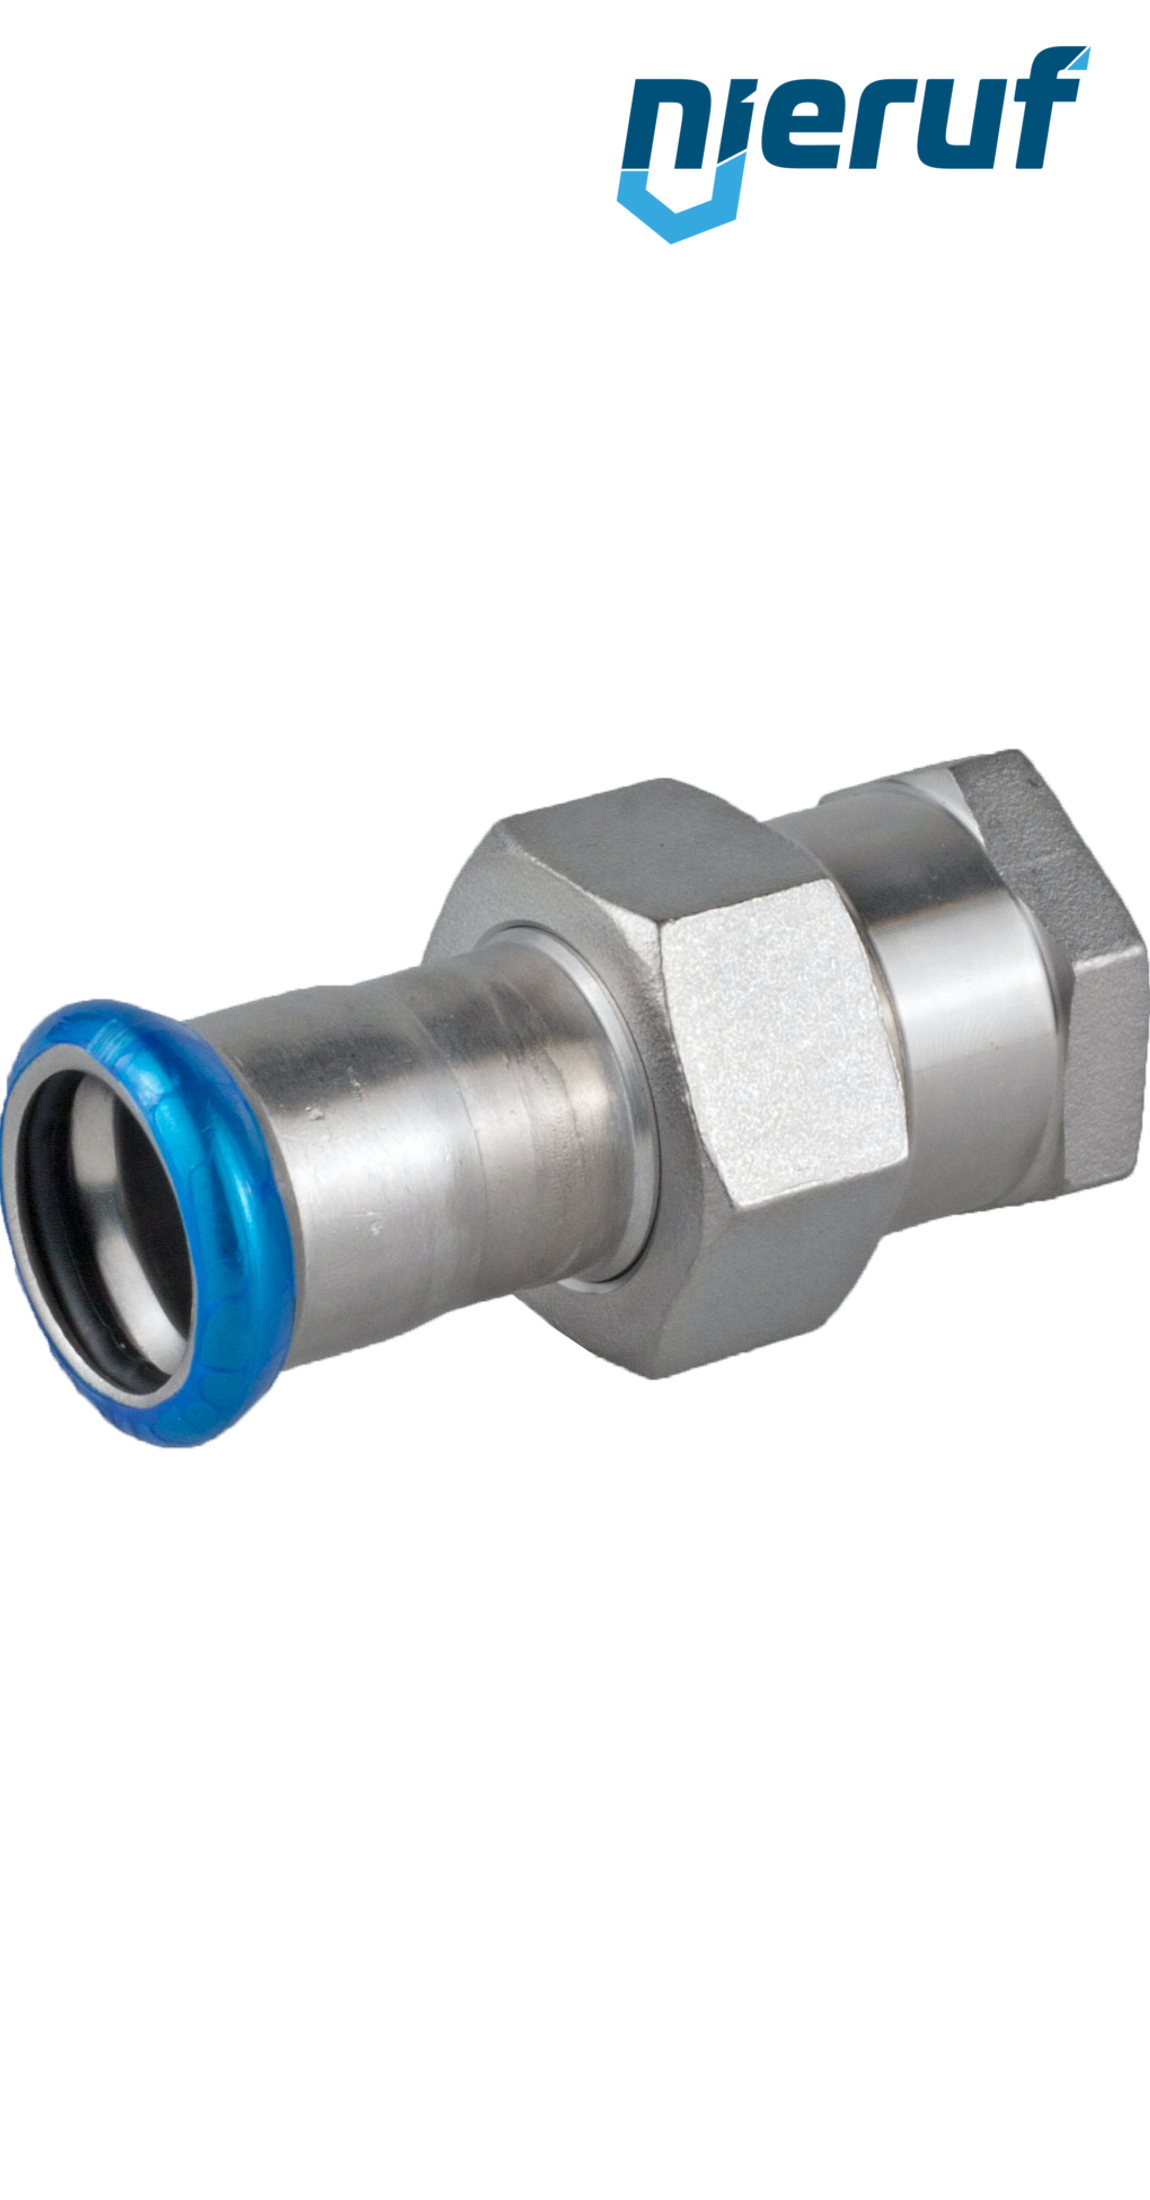 Union Coupling Pressfitting F DN20 - 22,0 mm female thread 3/4" inch stainless steel